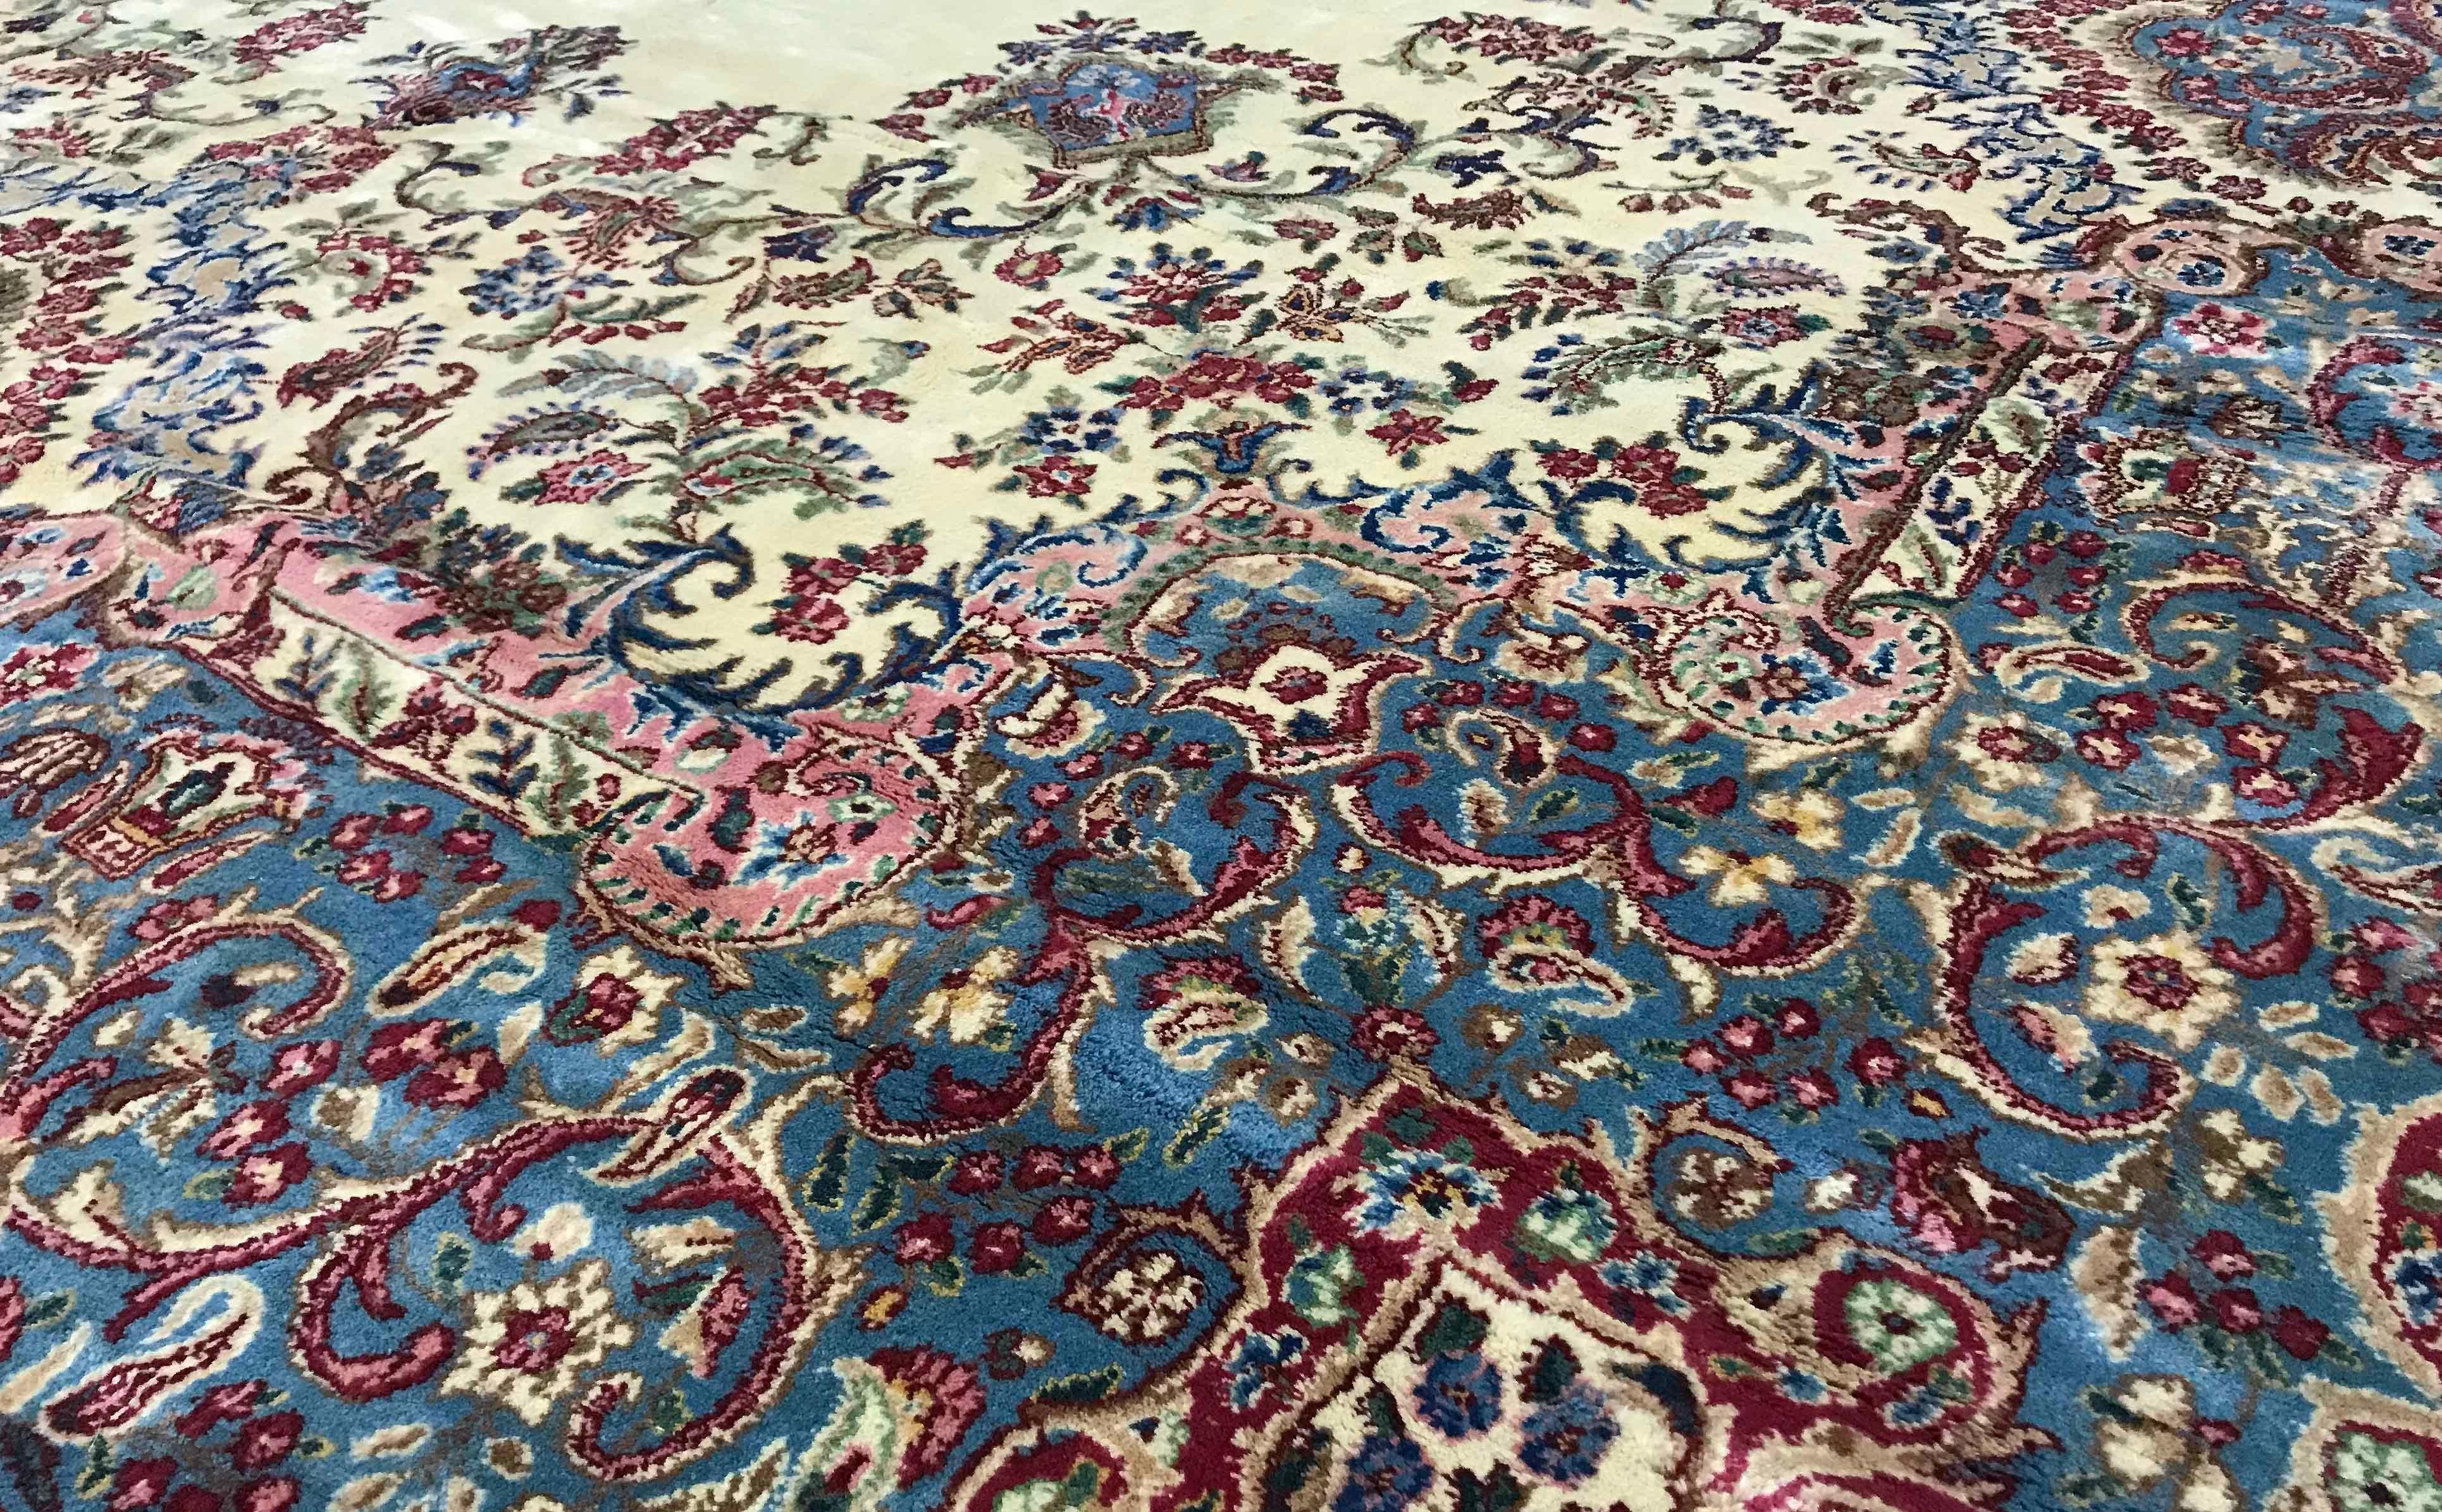 Vintage oversize Persian Kerman rug, circa 1940. The soft ivory ground is the setting for this picturesque rug with a central medallion which blue colors and style is repeated in the borders to create this large but gentle looking piece. Size: 9'9 x